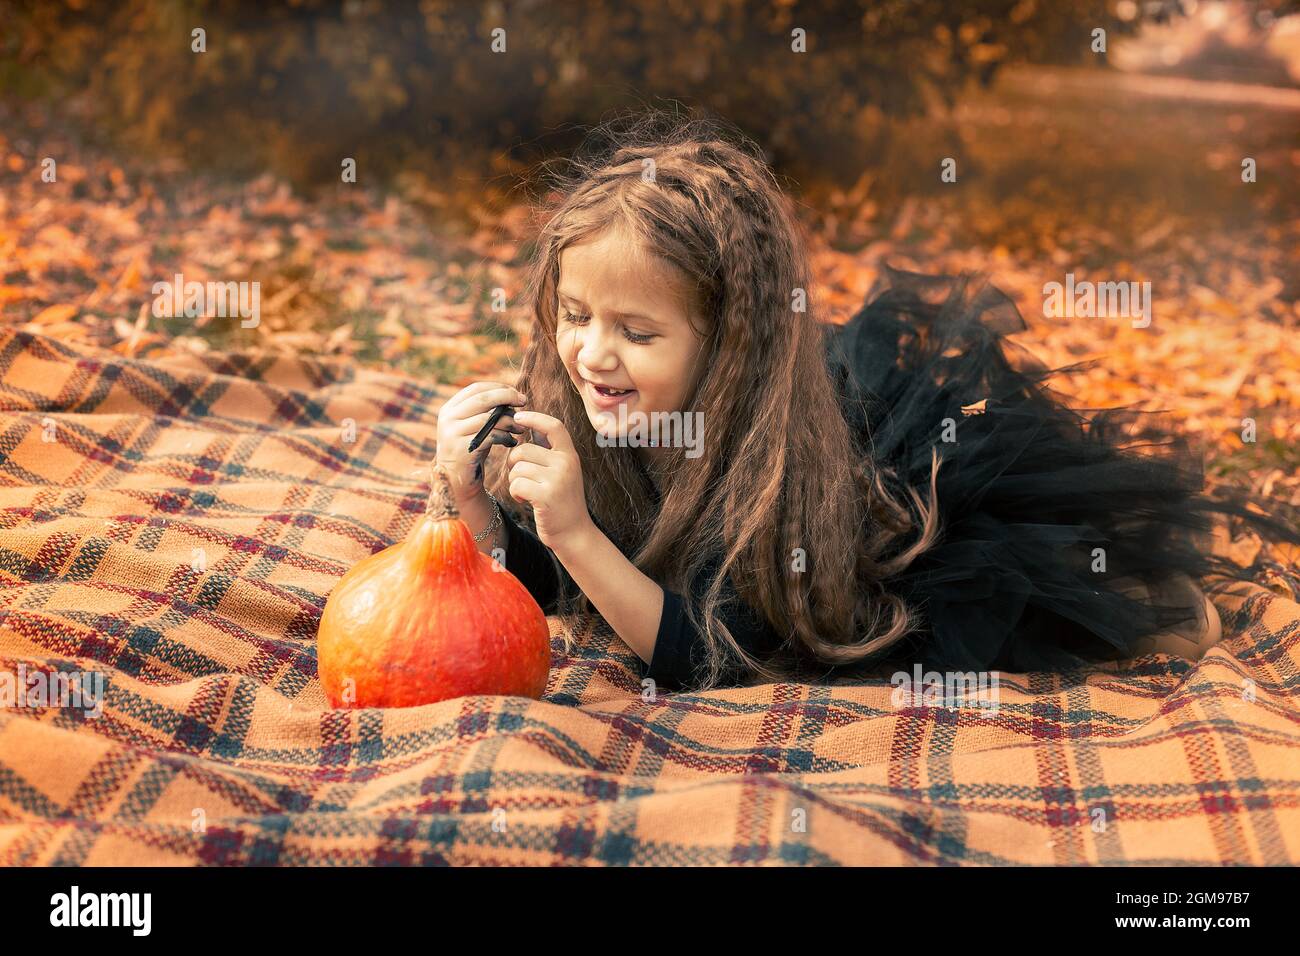 Halloween. Girl with long hair wearing black dress sits on an orange blanket in the park and draws a face on a pumpkin. Stock Photo